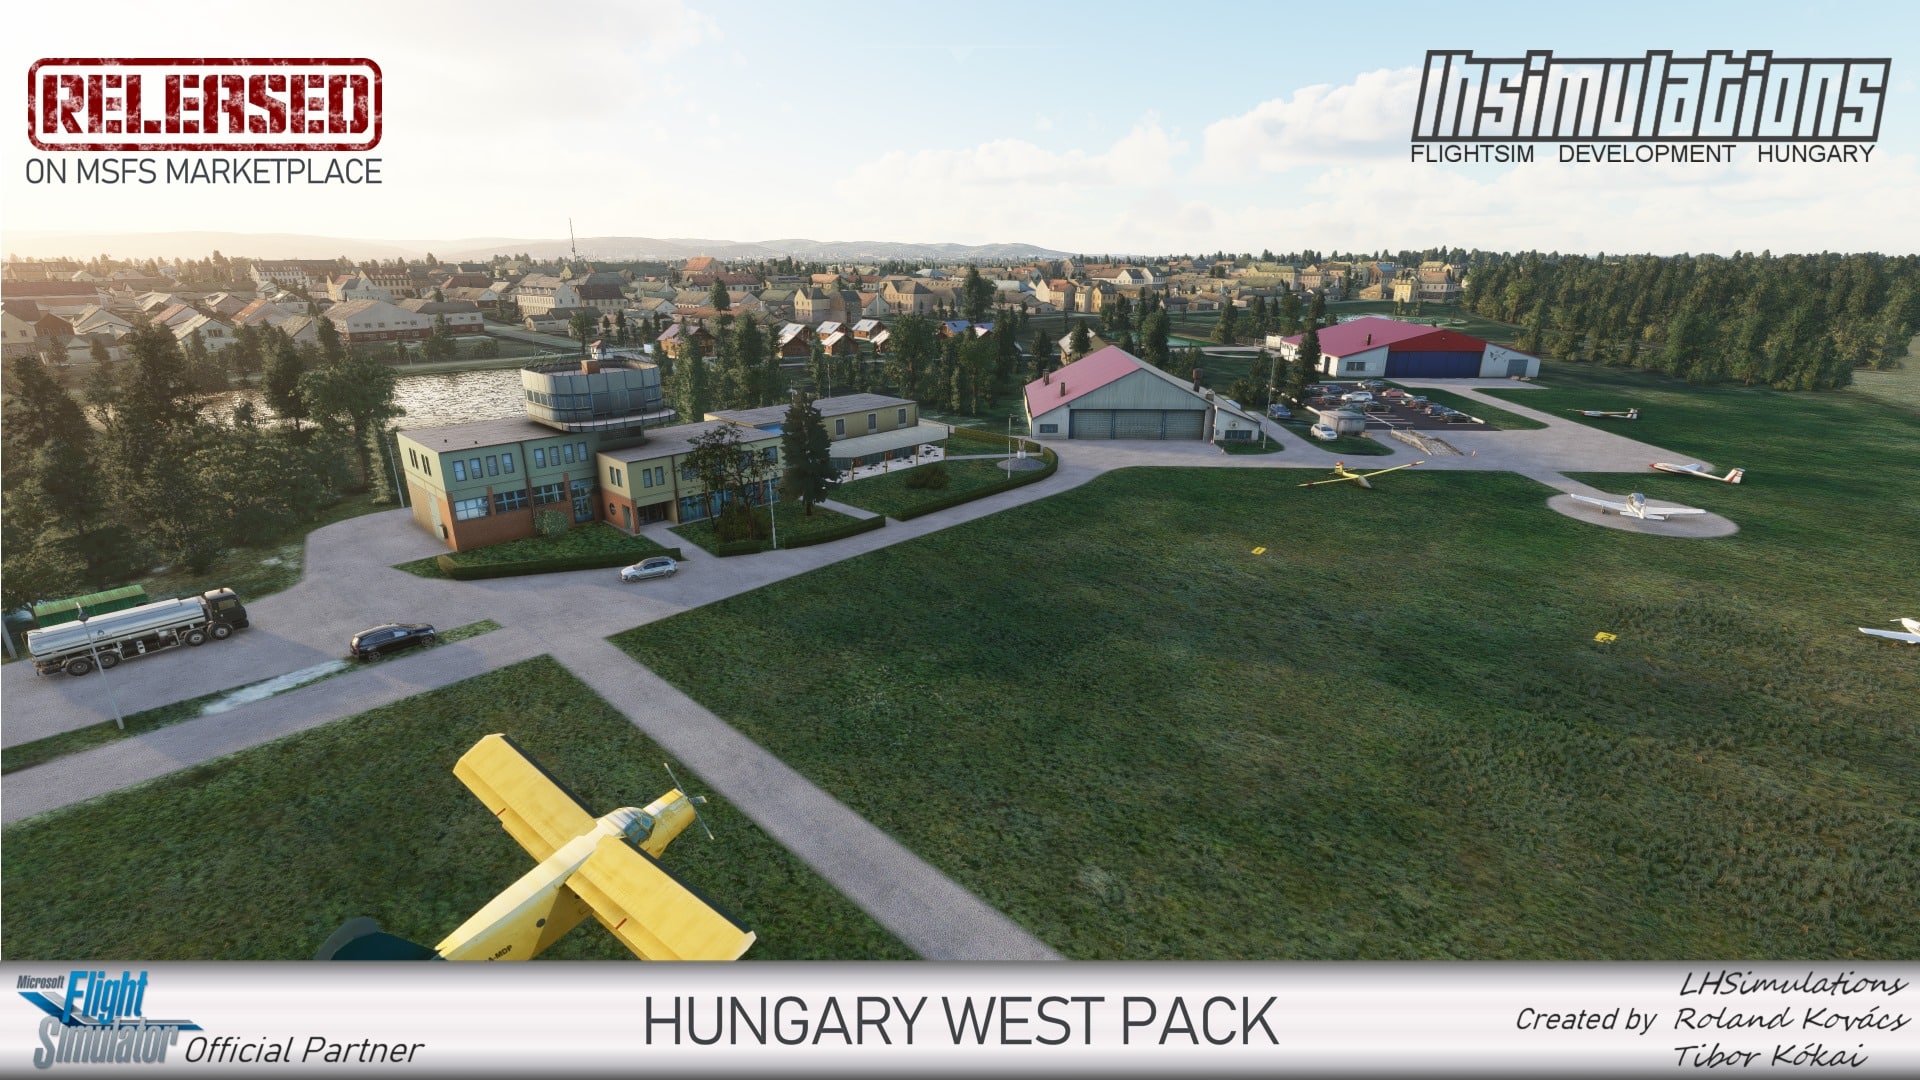 LHSimulations Releases Hungary West Pack for MSFS - LHSimulations, Microsoft Flight Simulator